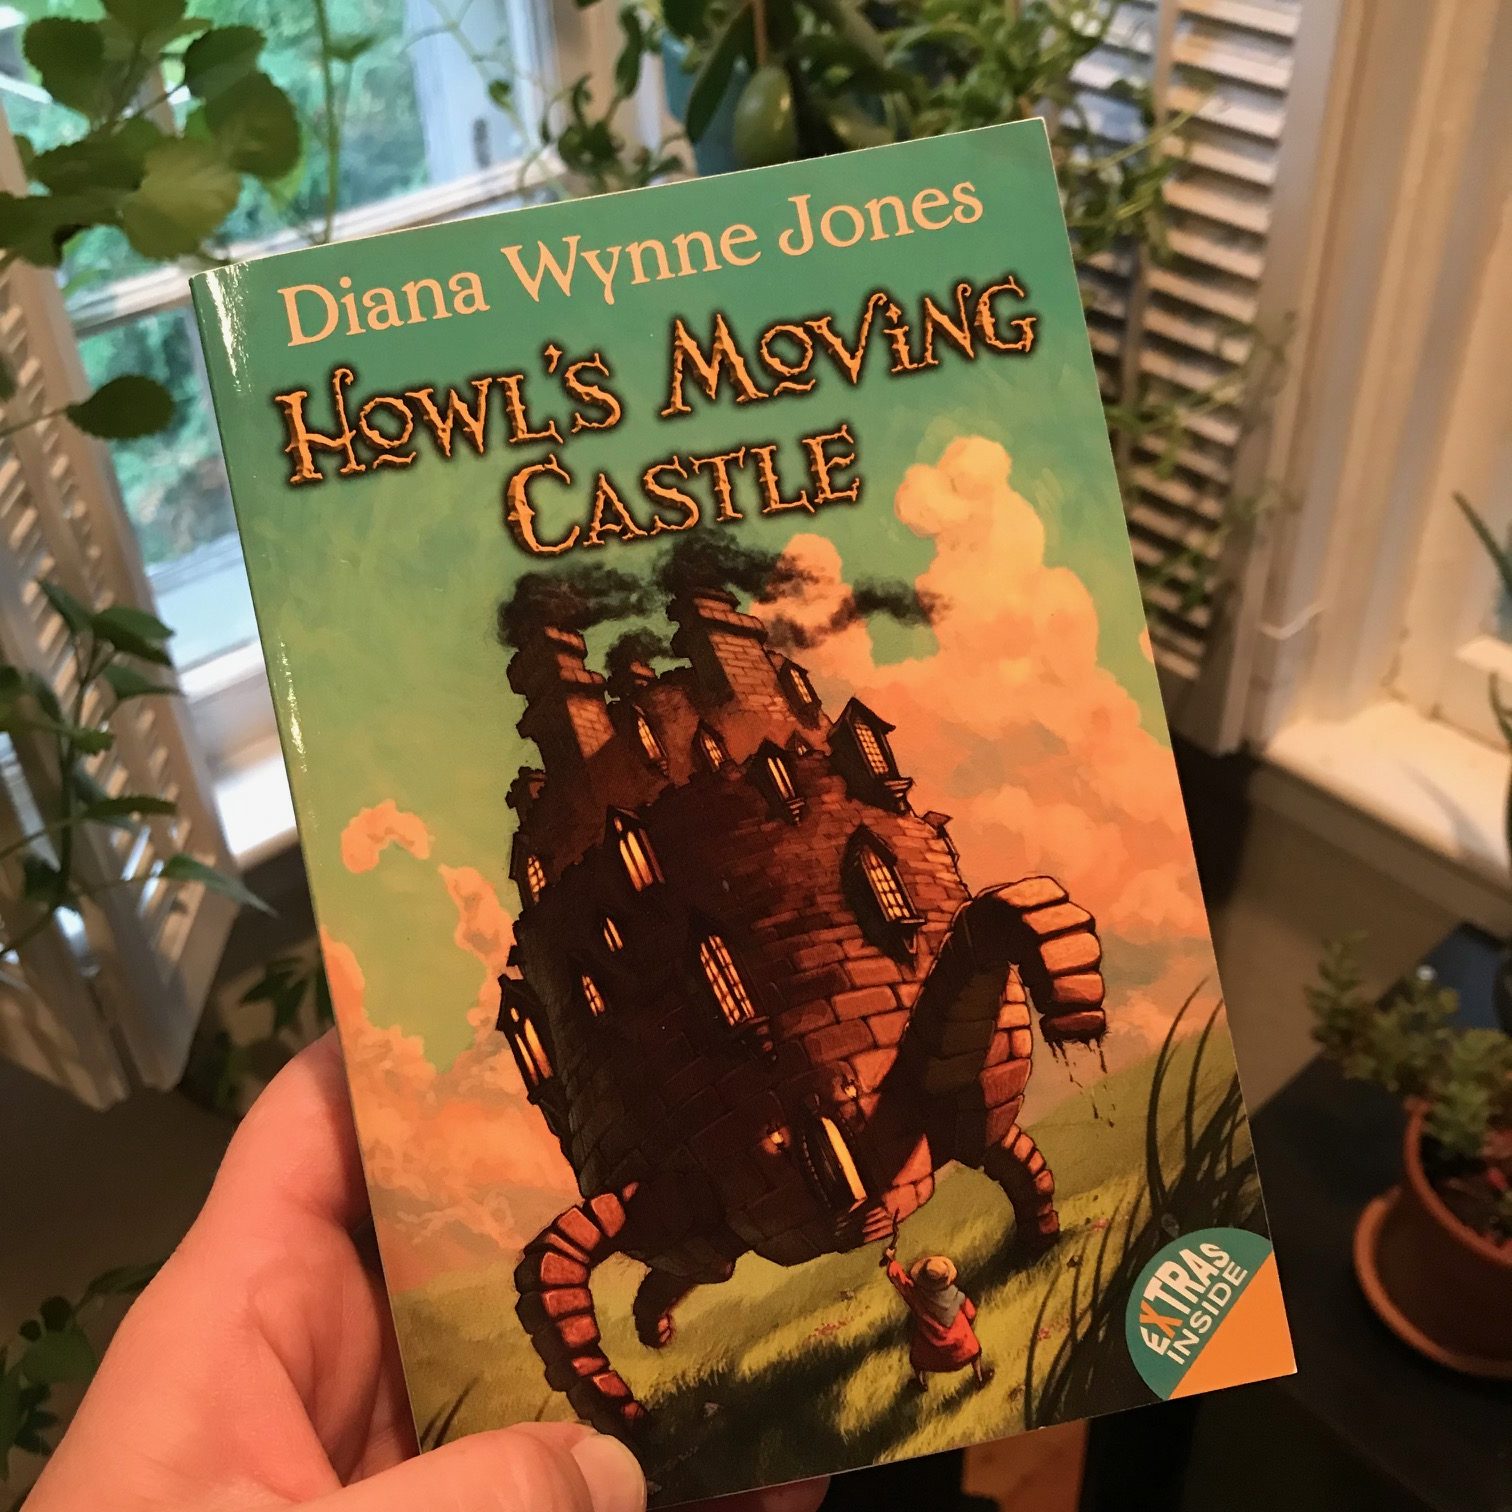 Cover of the book "Howl's Moving Castle" with a brick castle with four legs walking across the grass, and a figure seen from behind holding up a stick toward it.